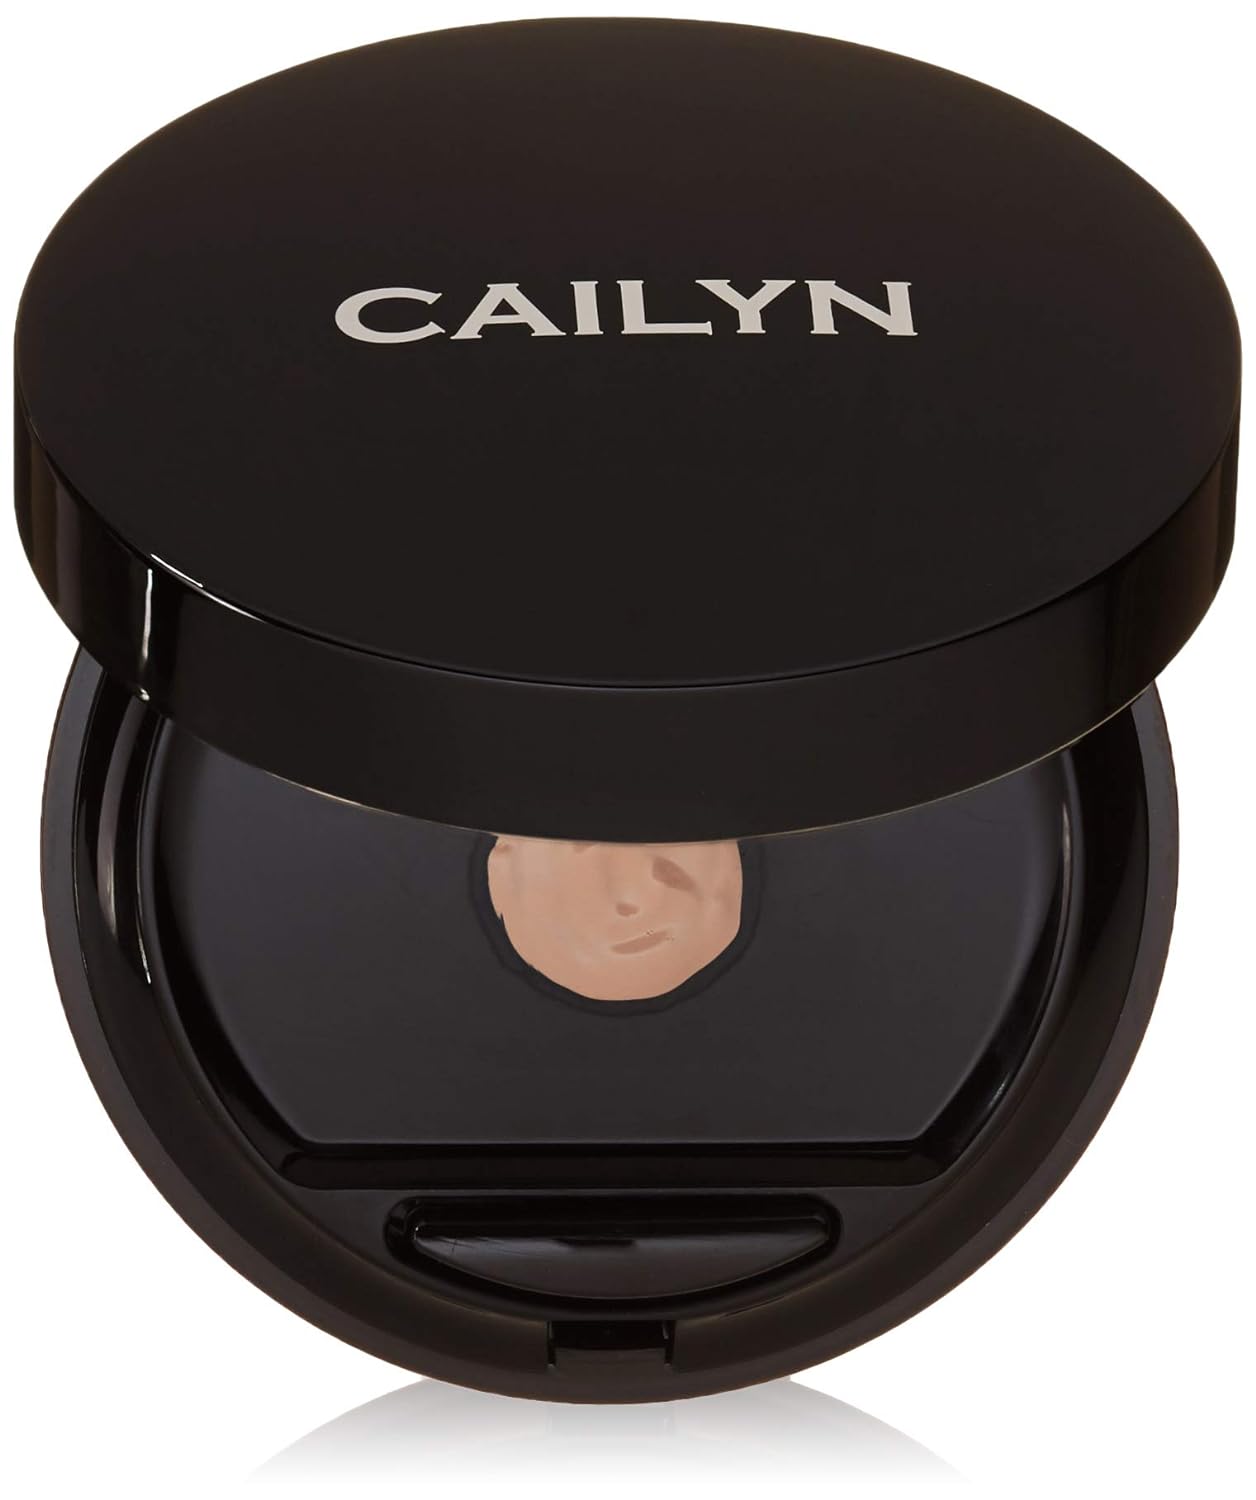 CAILYN BB uid Touch Compact, Porcelain